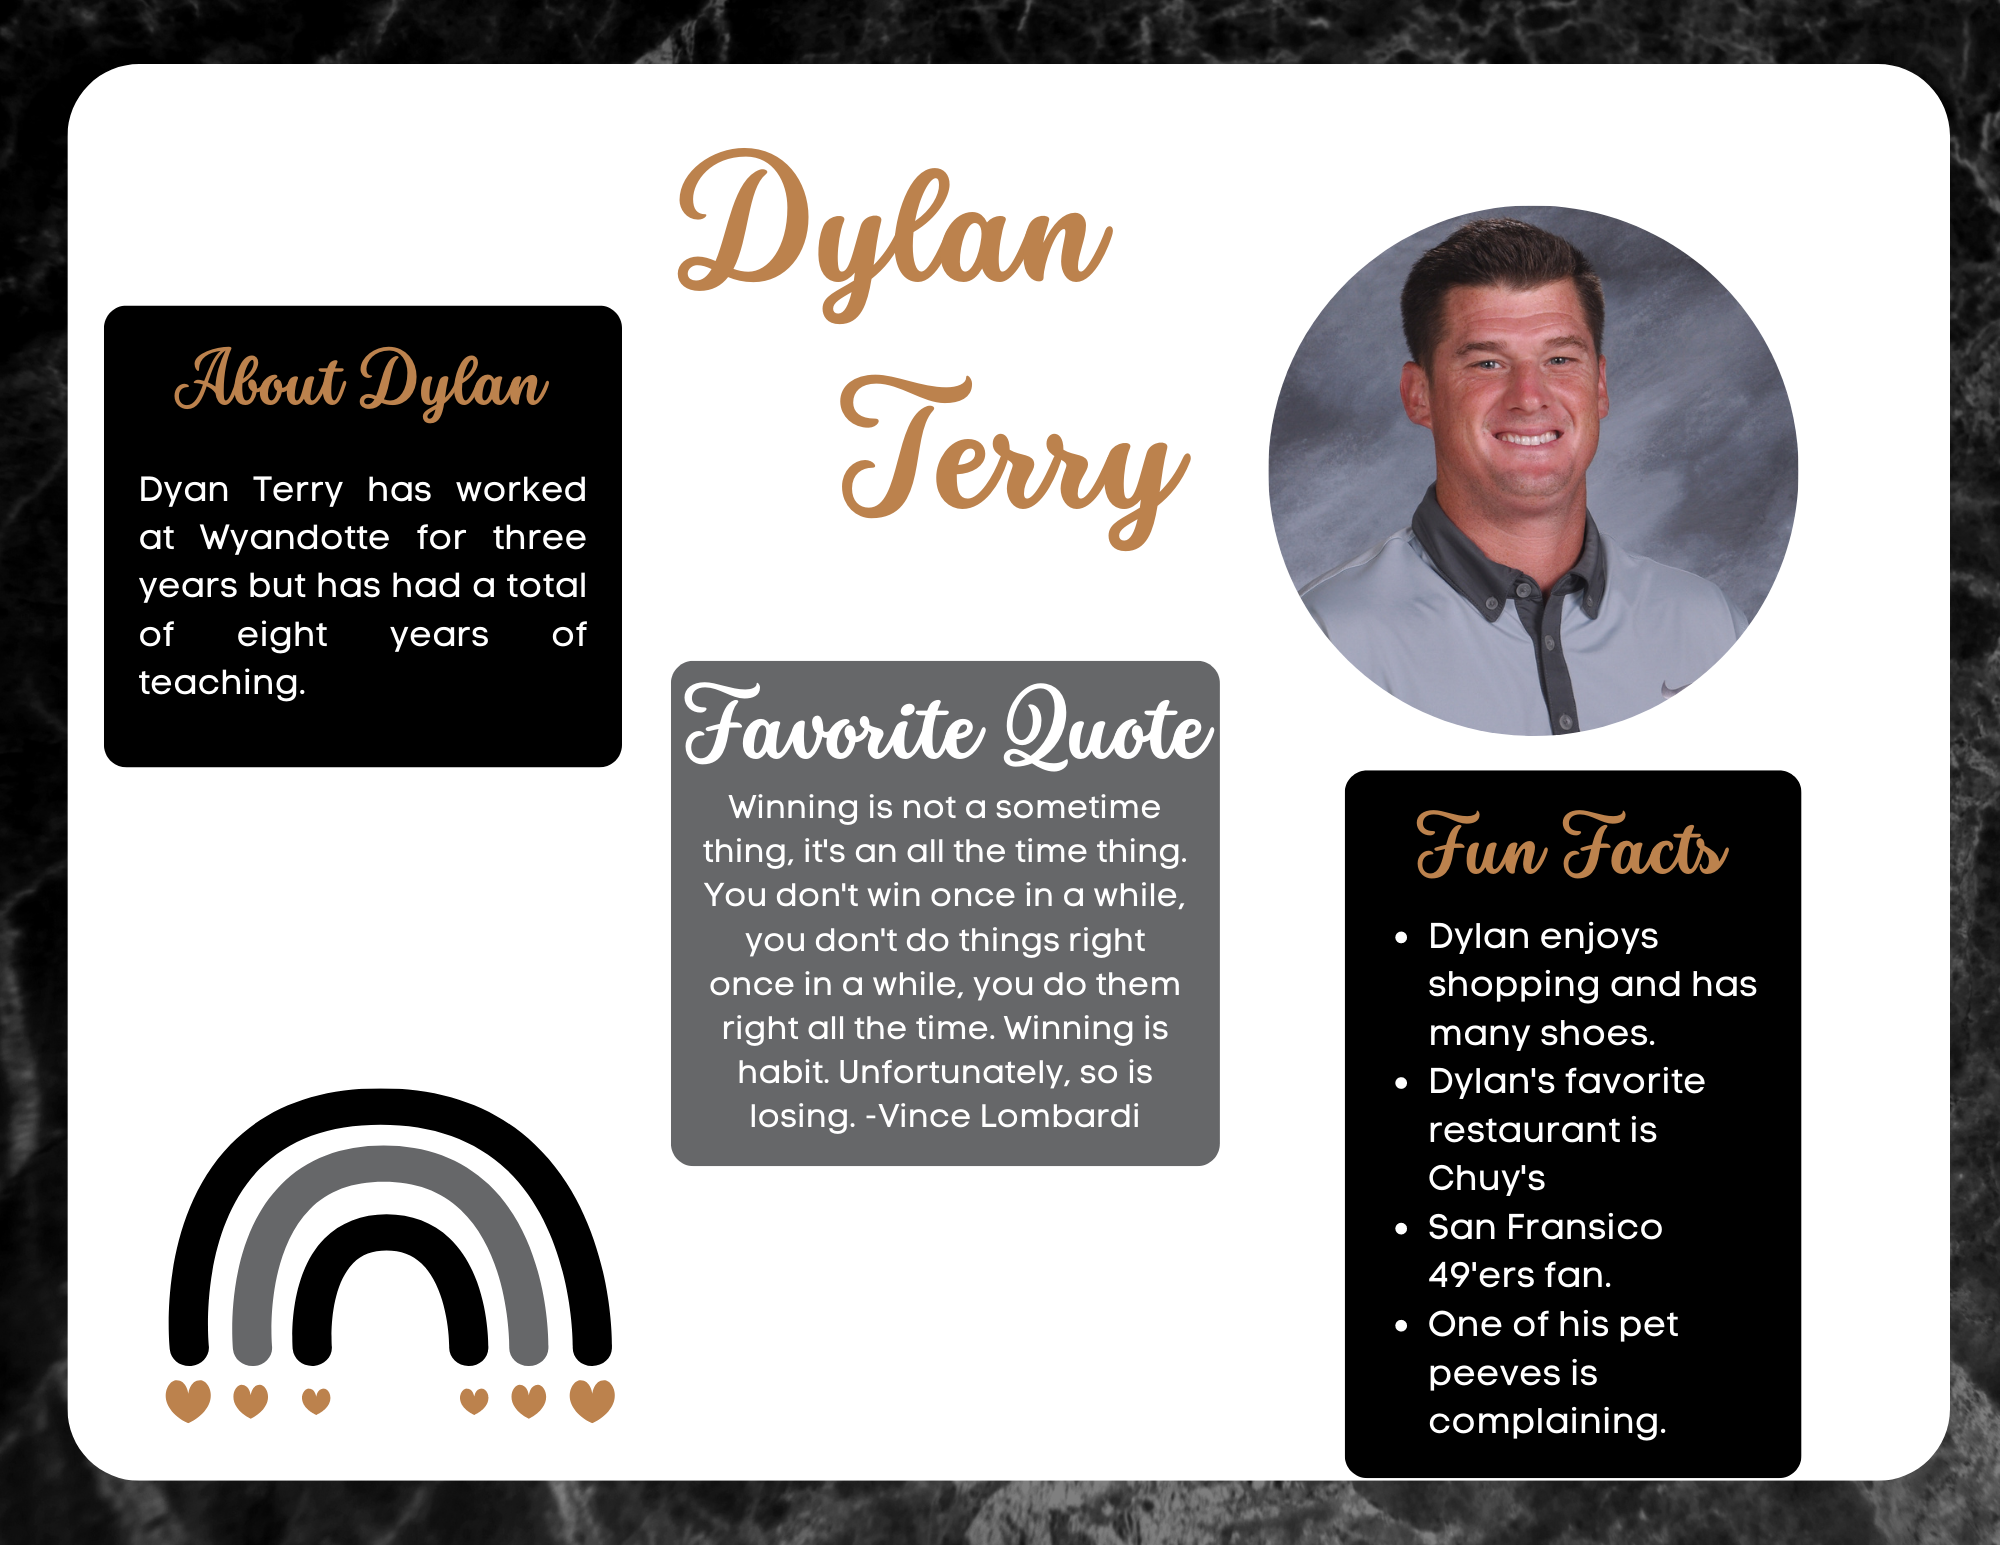 Dylan Terry: Coach